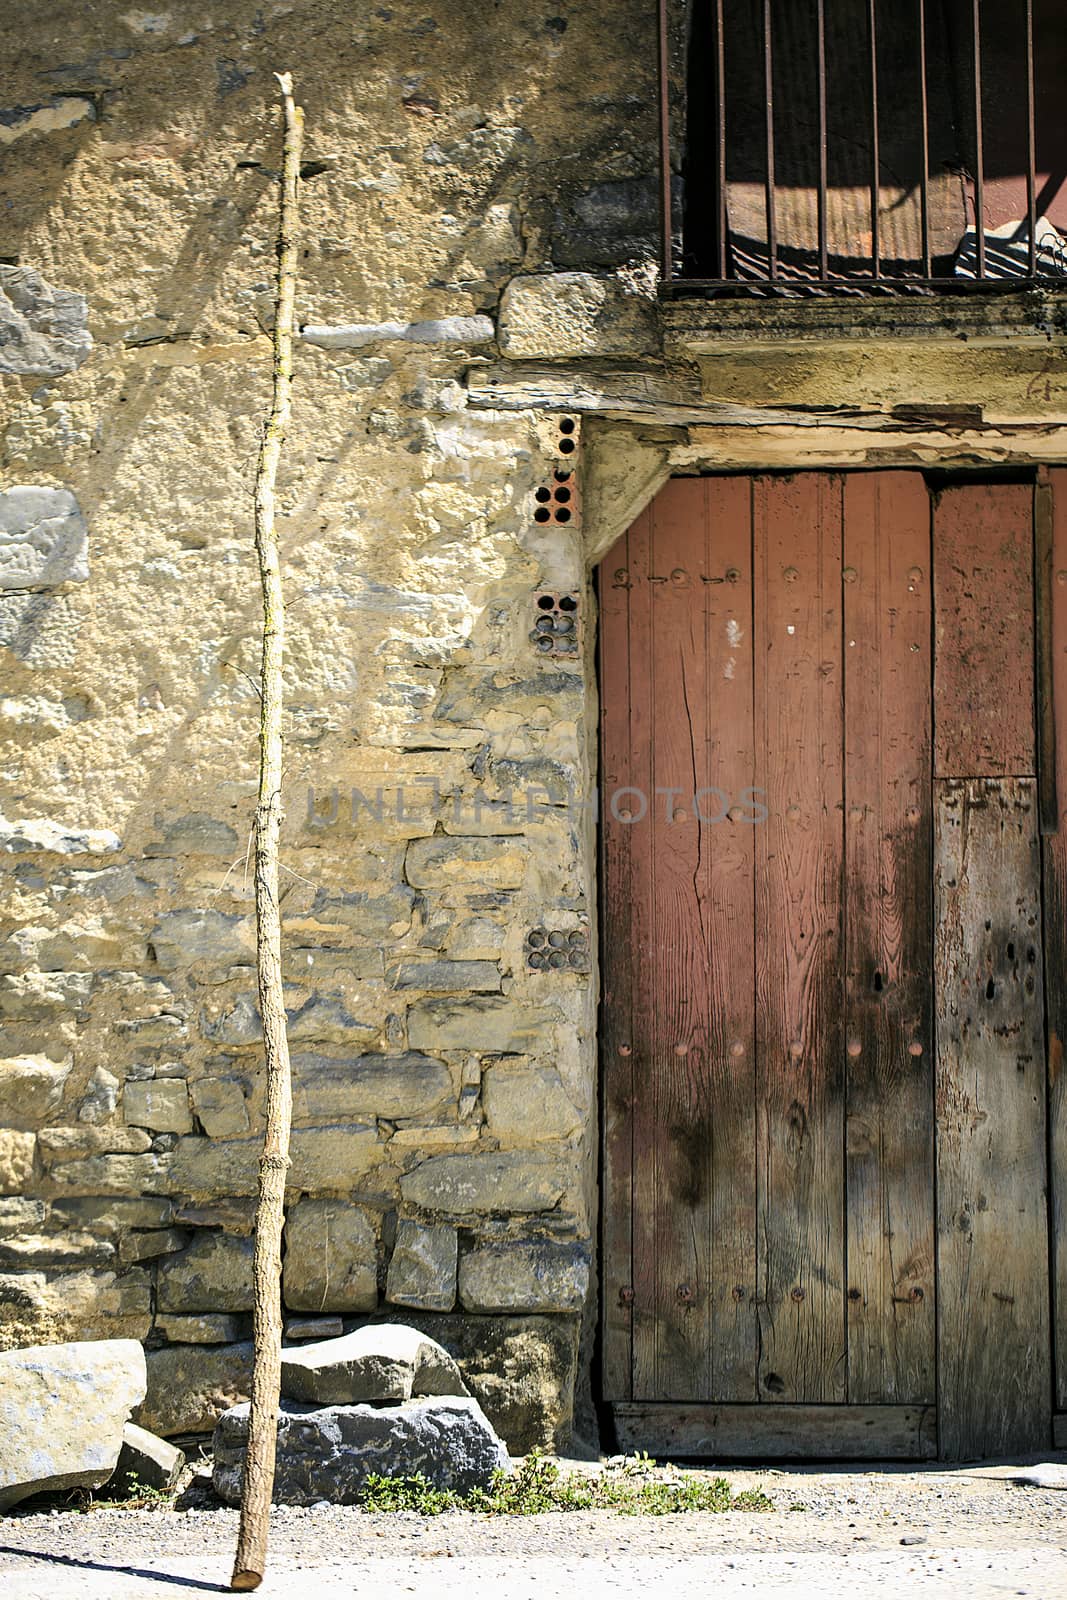 Vintage old wooden door in a Town of spain by nachrc2001